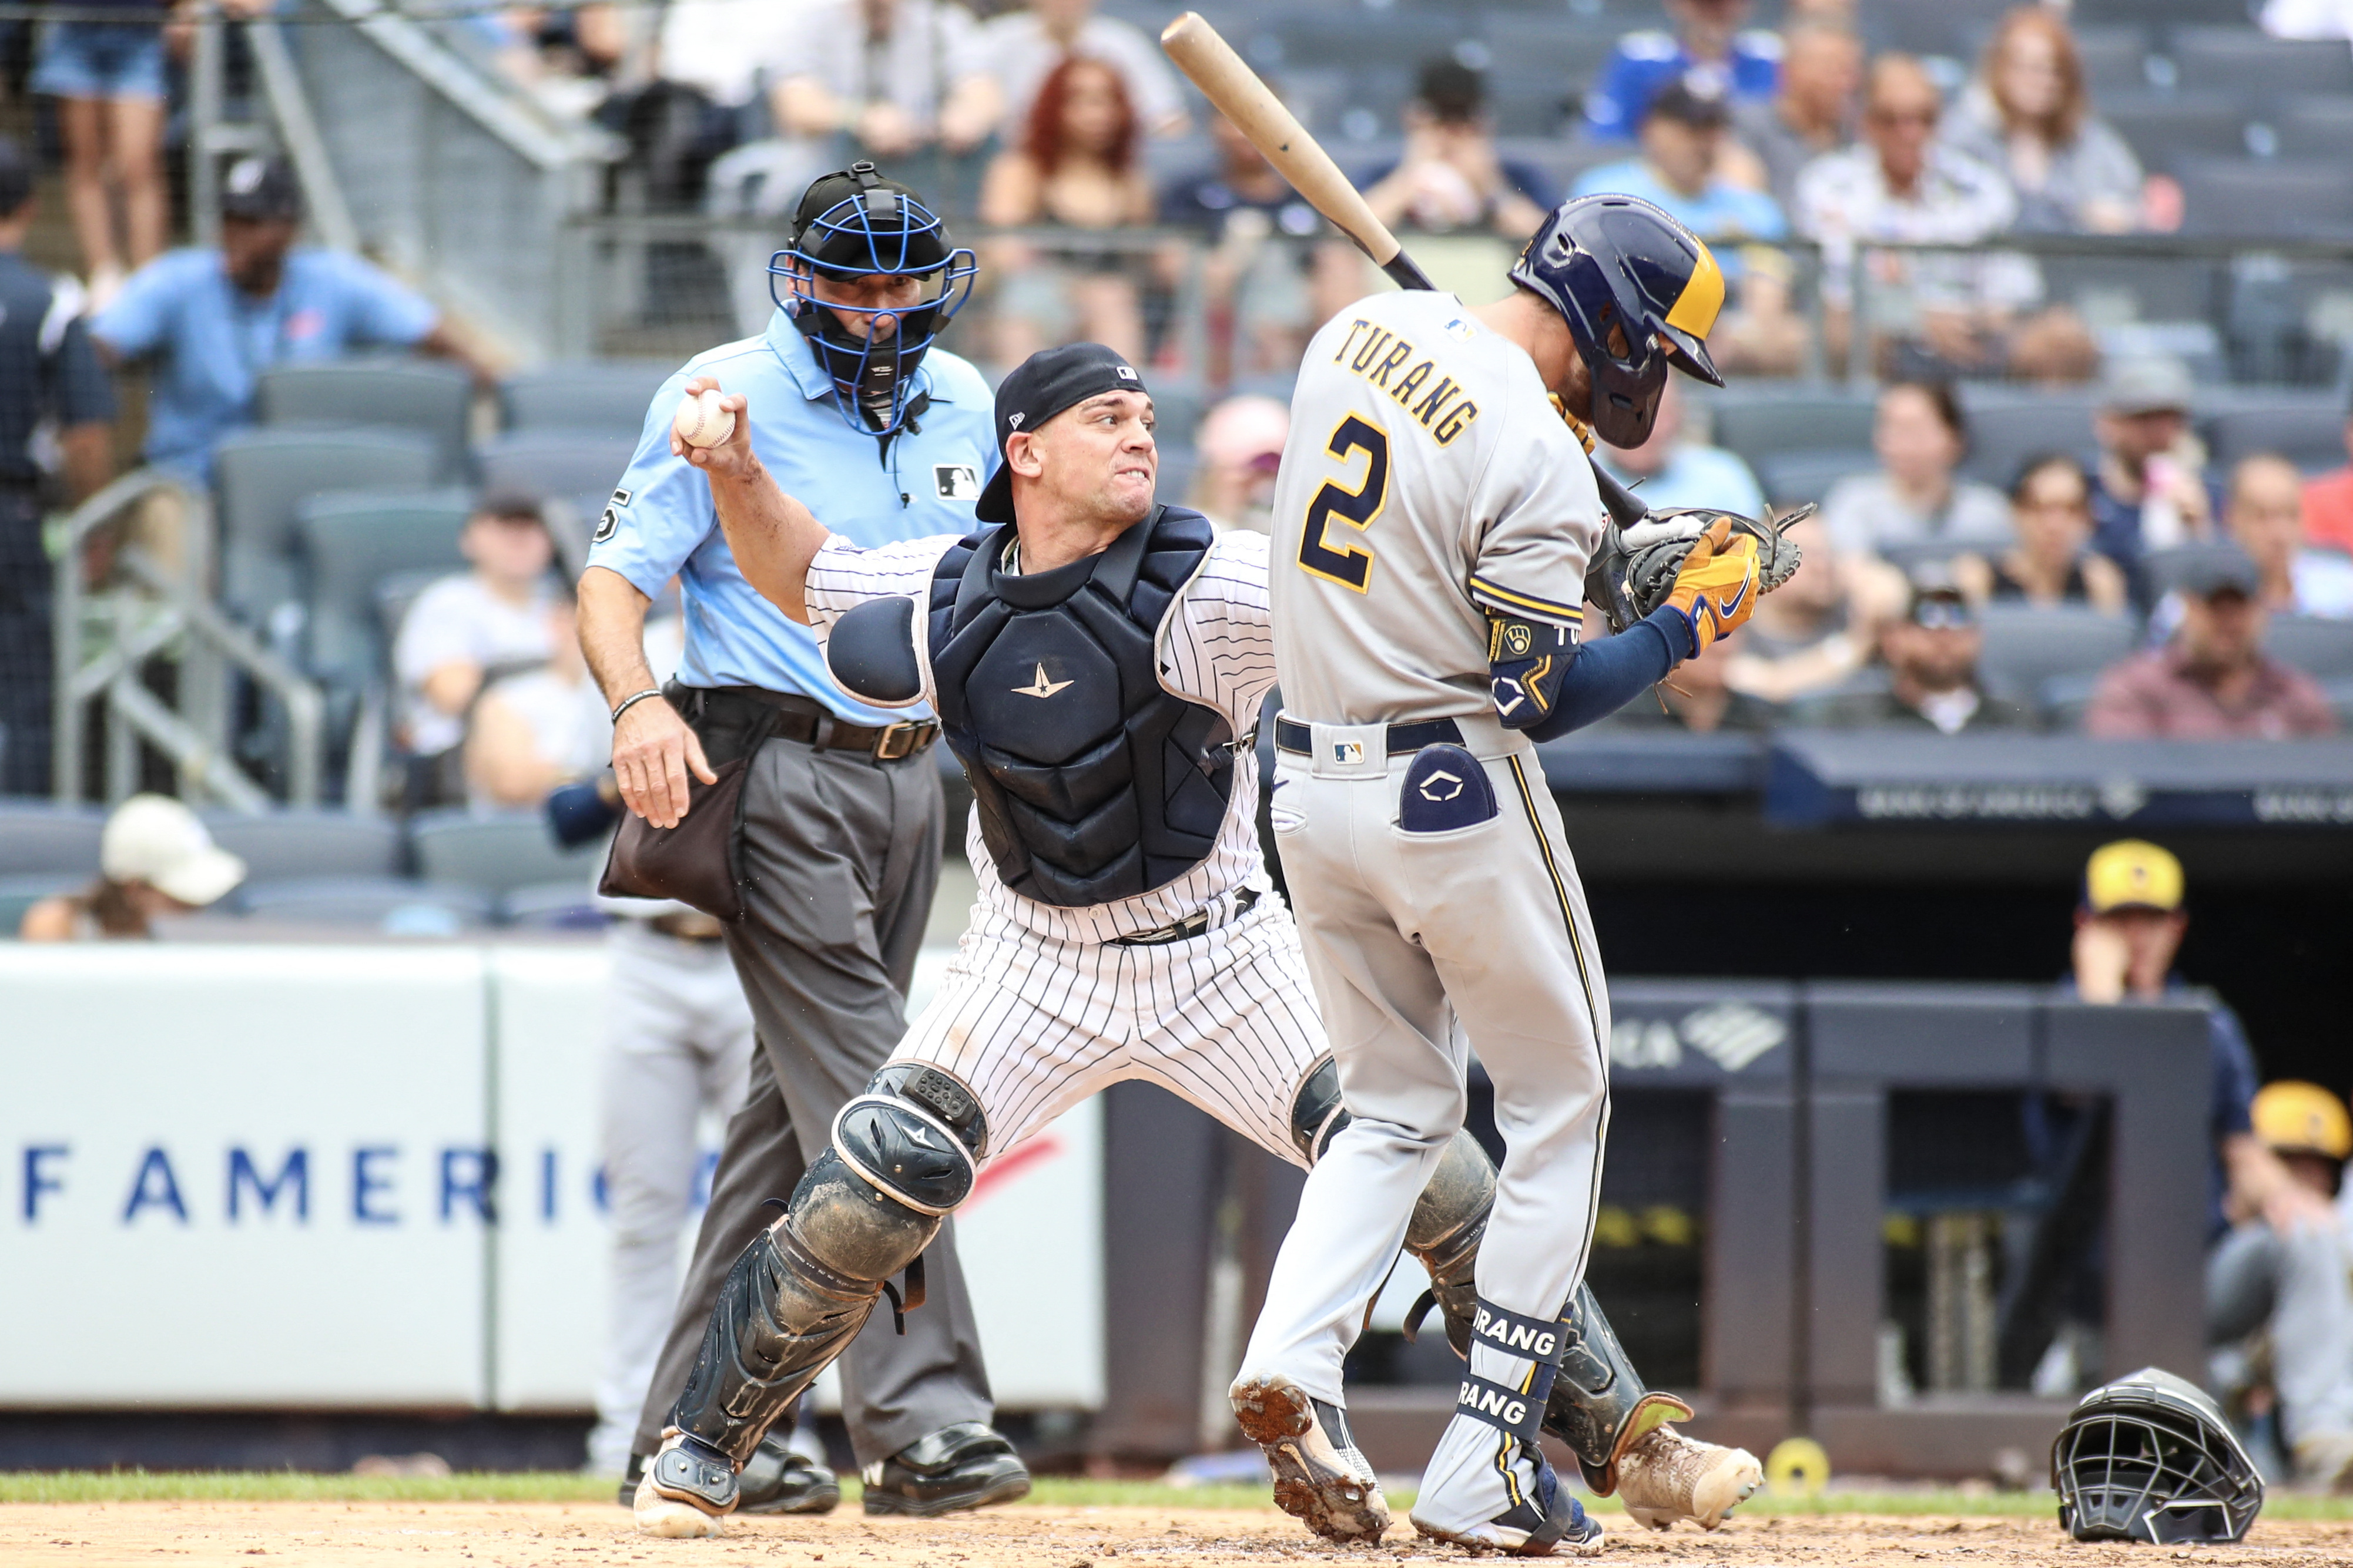 Yankees end Brewers' no-hit bid in 11th, win game in 13th